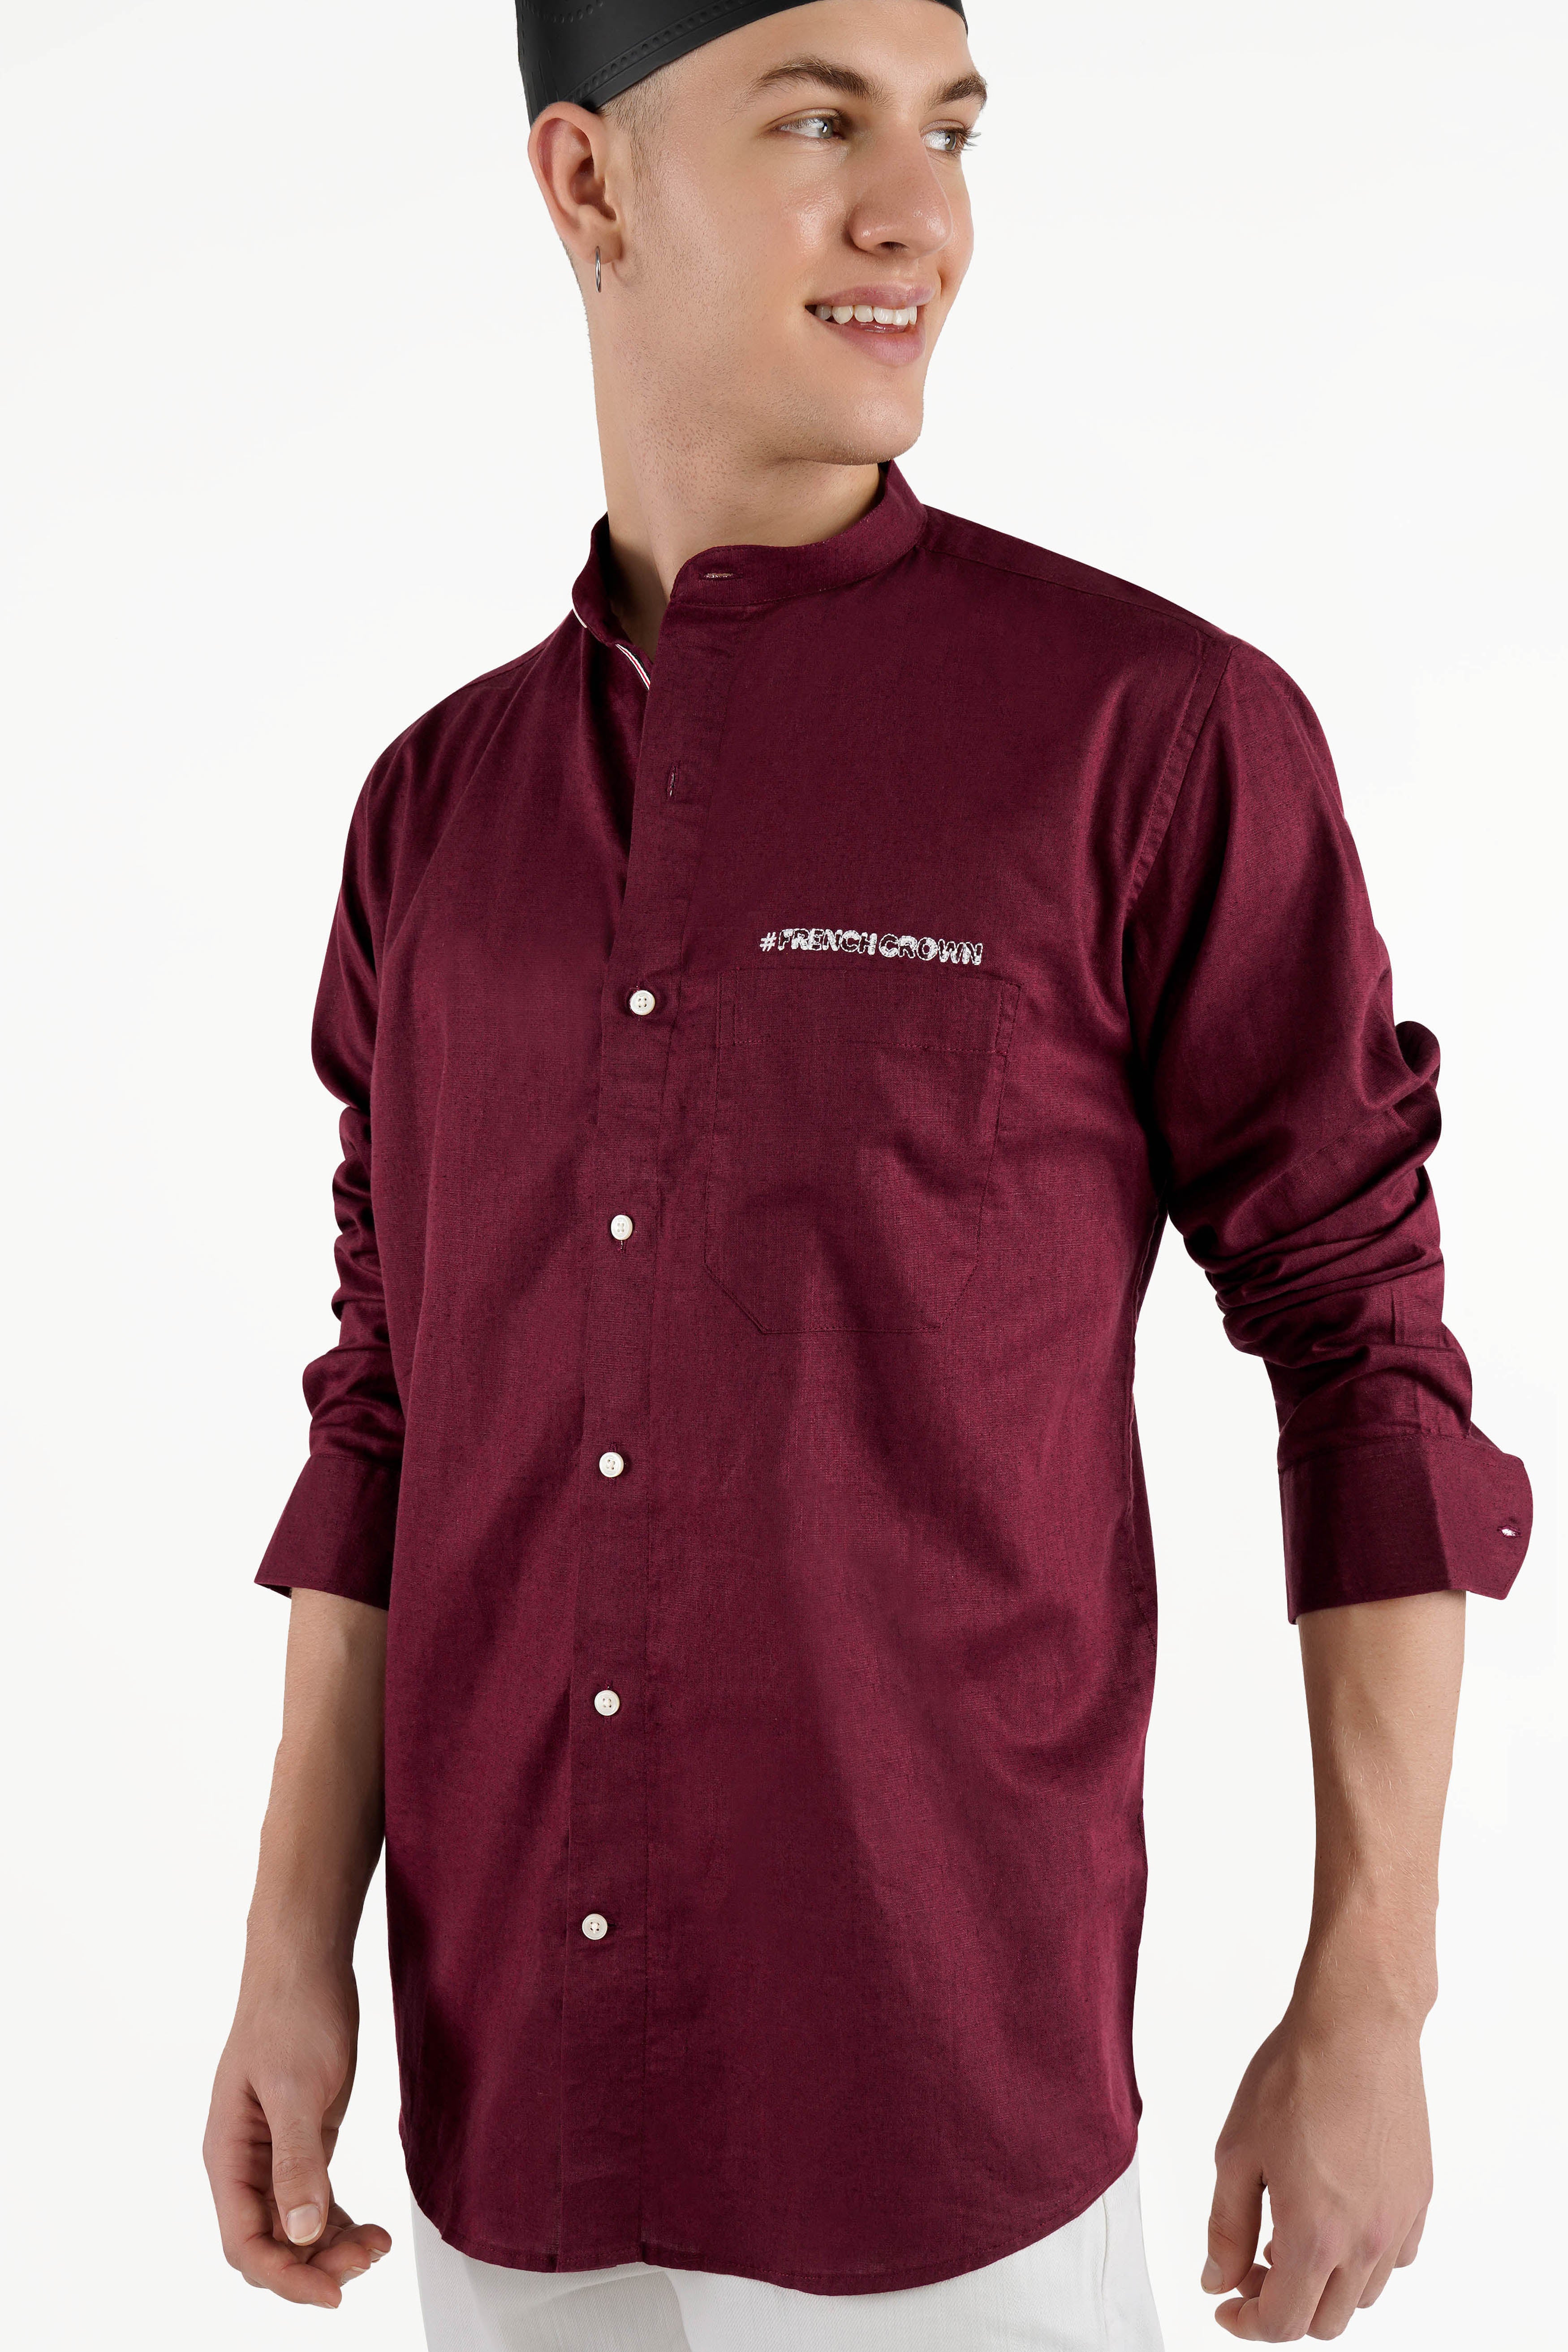 Cocoa Bean Maroon with French Crown Signature Embroidered Luxurious Linen Designer Shirt